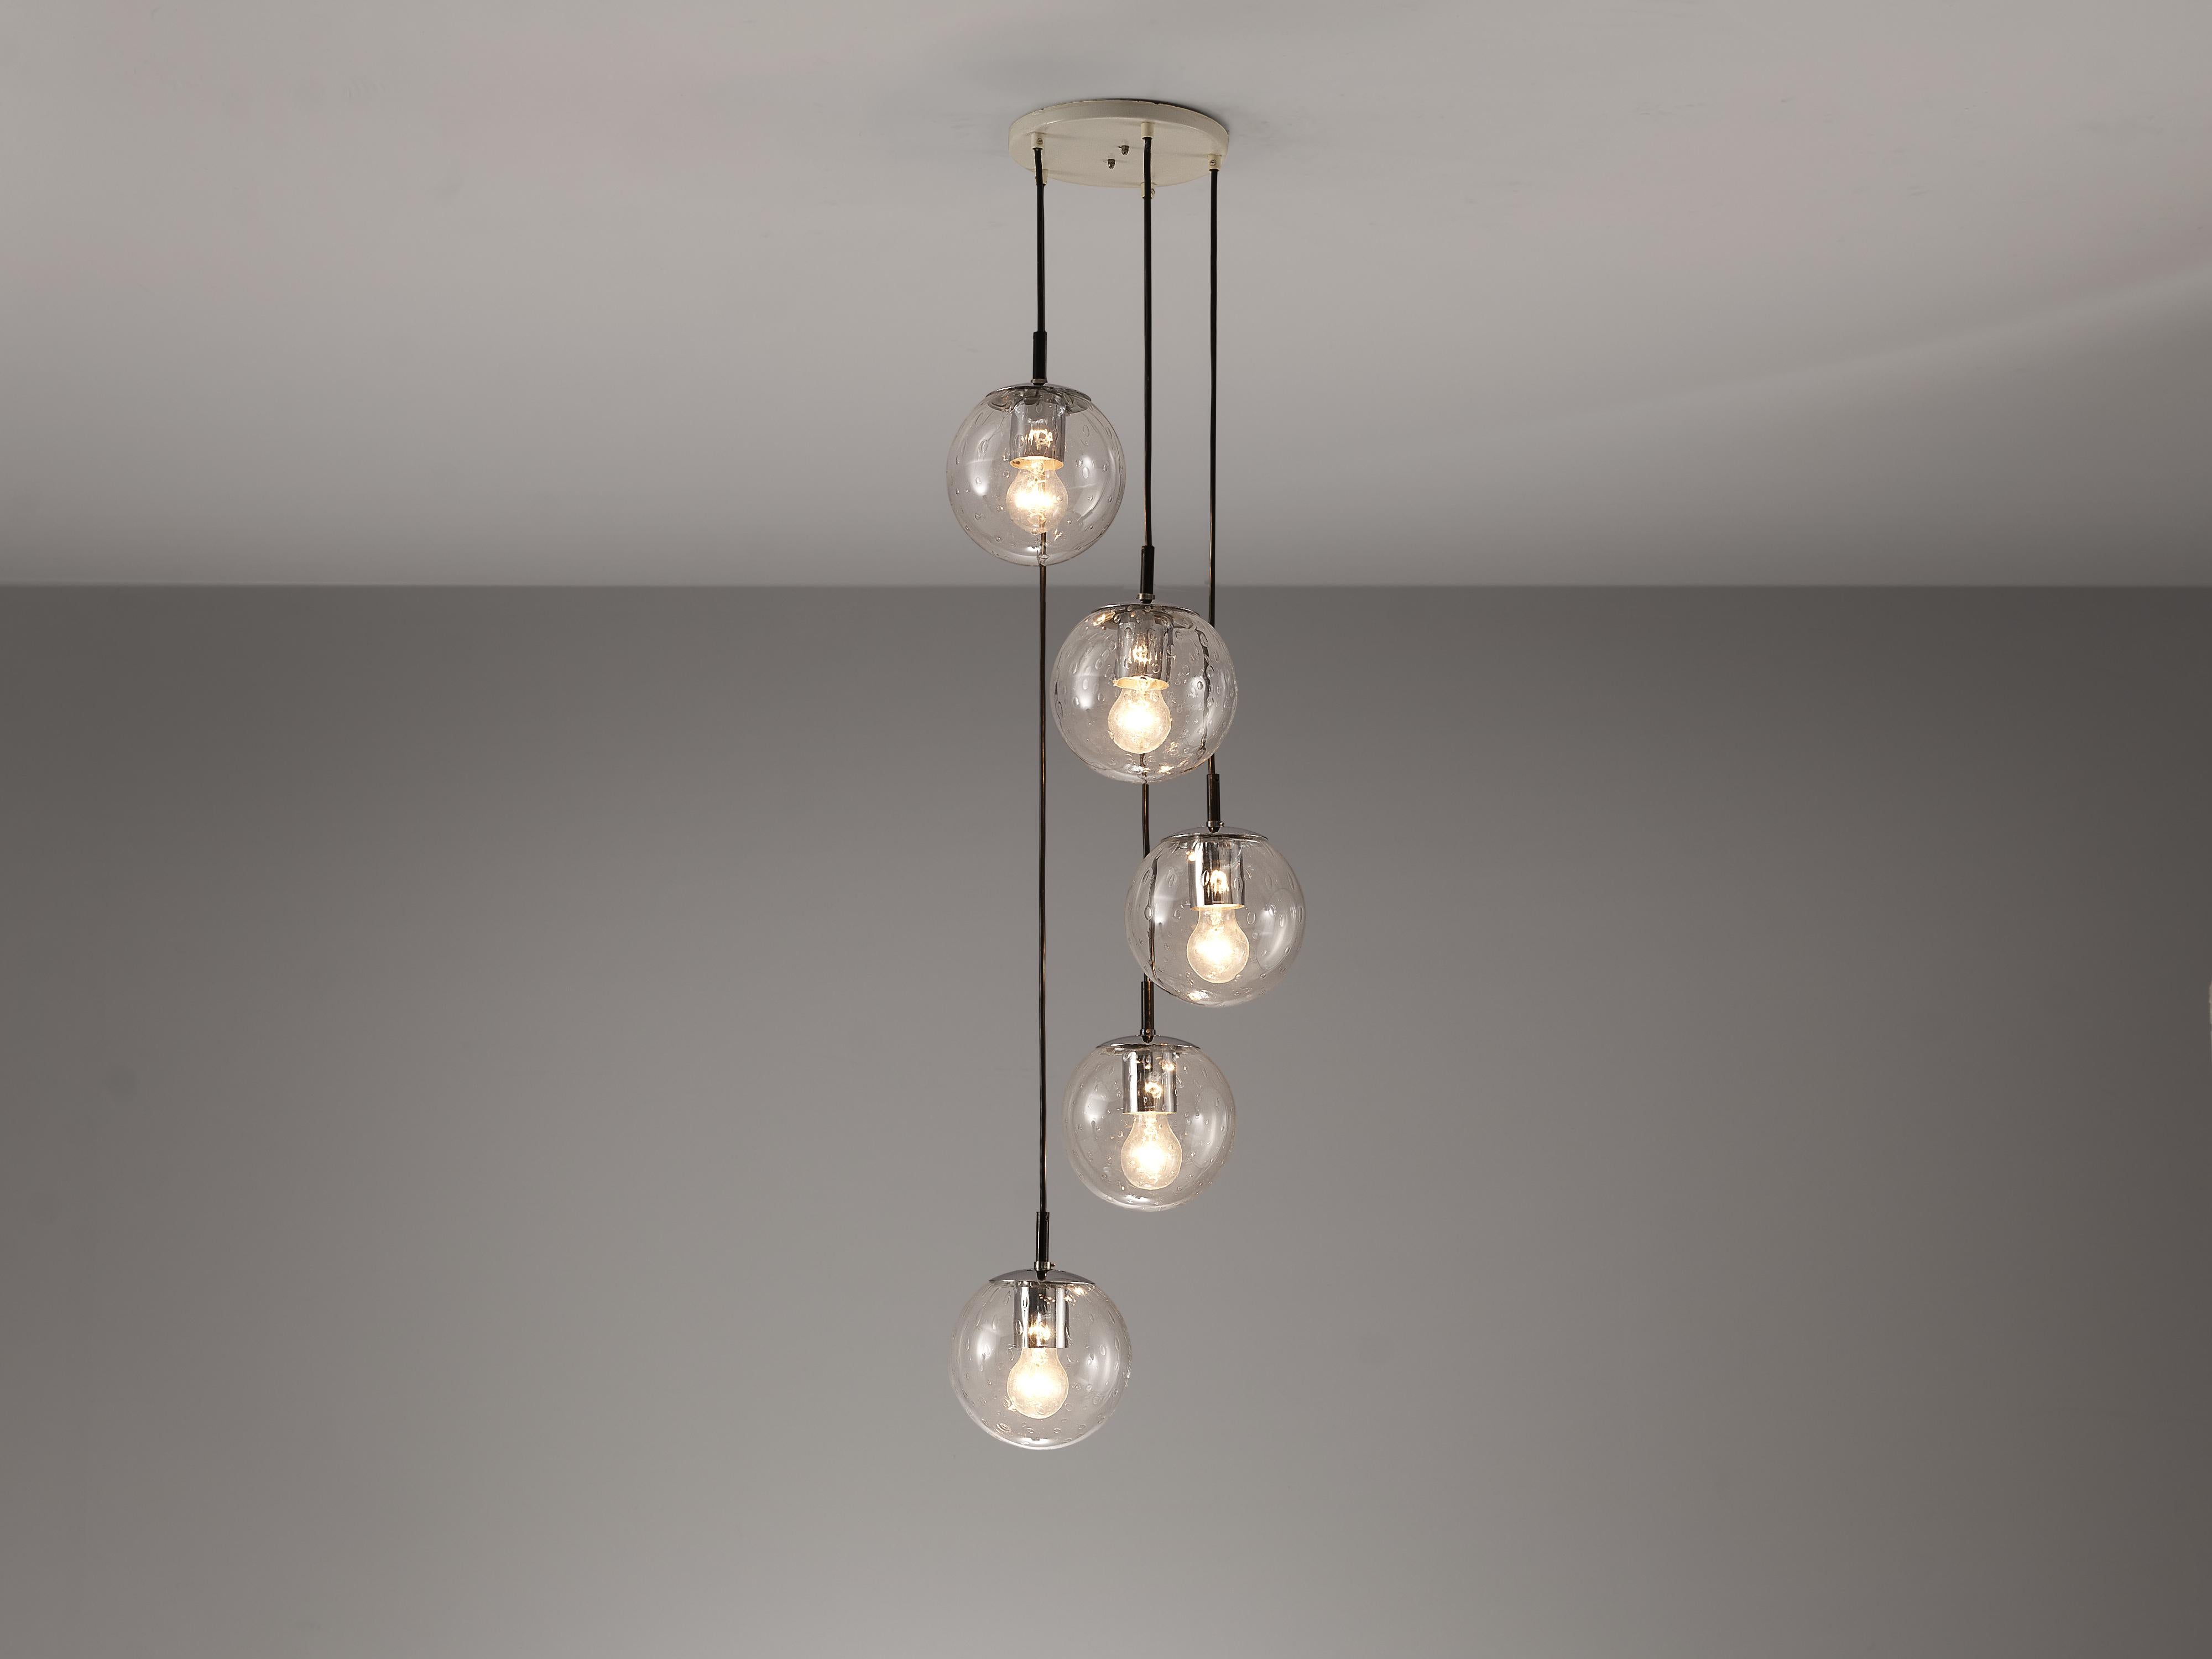 RAAK Amsterdam, pendant with five 'Bubble' spheres, glass, chrome-plated metal, The Netherlands, 1960s 

A sophisticated composition of five hand-blown glass pendants is created by the Dutch manufacturer RAAK Amsterdam. As a result of the